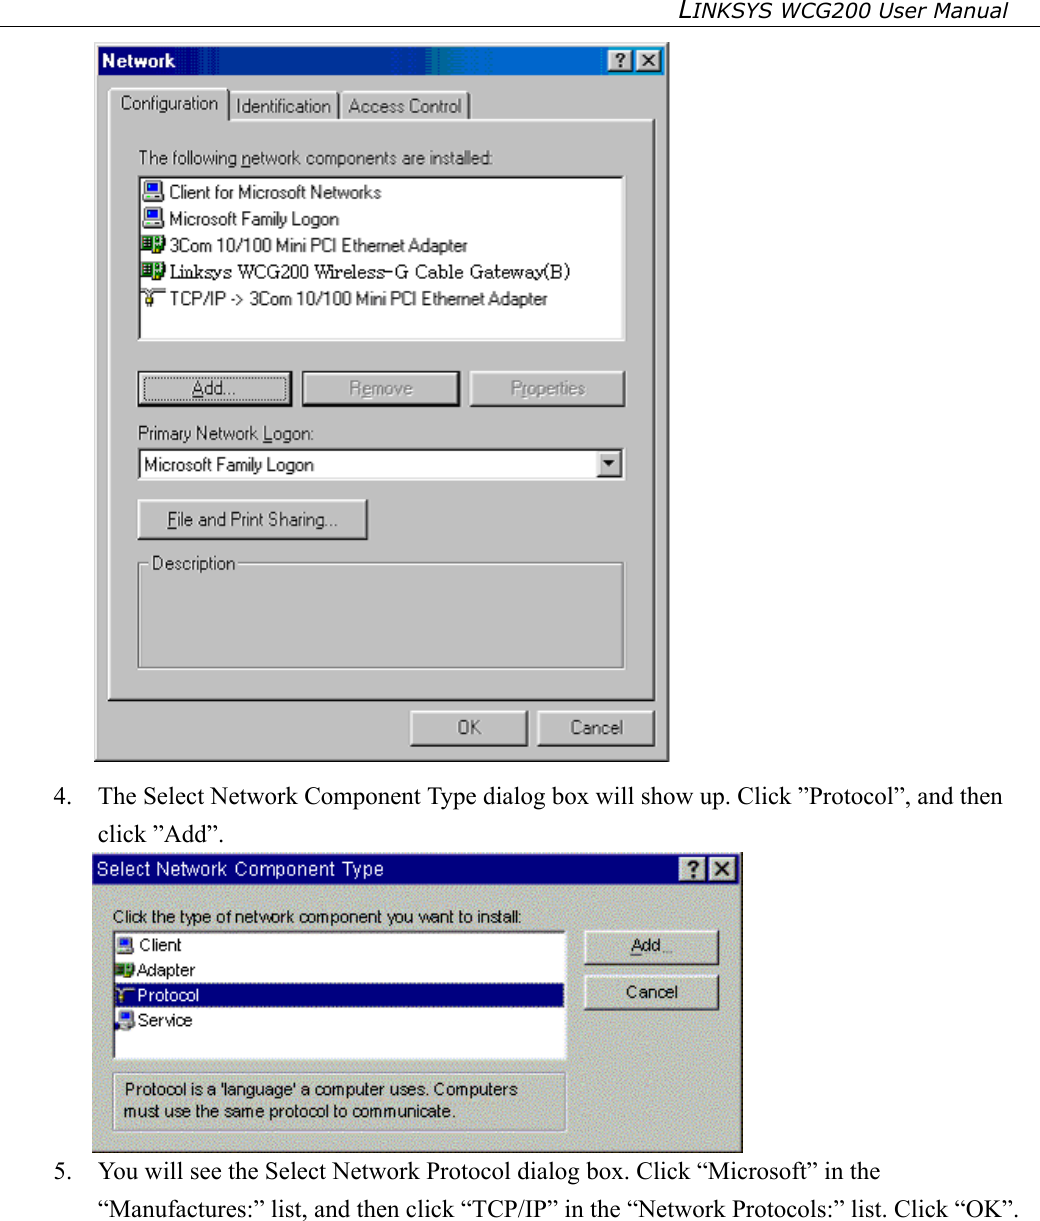 LINKSYS WCG200 User Manual    4.  The Select Network Component Type dialog box will show up. Click ”Protocol”, and then click ”Add”.  5.  You will see the Select Network Protocol dialog box. Click “Microsoft” in the “Manufactures:” list, and then click “TCP/IP” in the “Network Protocols:” list. Click “OK”. 